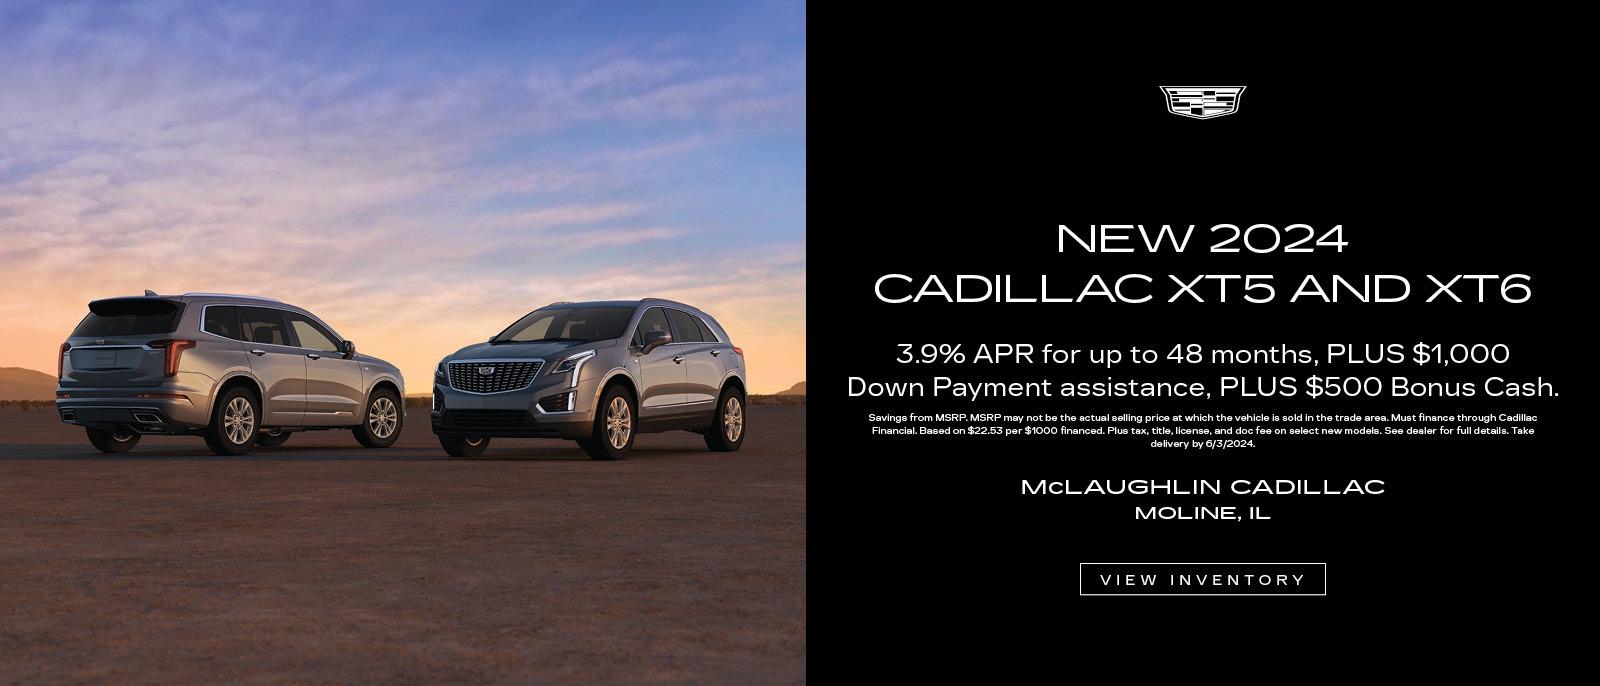 New 2024 Cadillac XT5 and XT6 with 3.9% APR for up to 48 months, plus $1,000 down payment assistance, plus $500 Bonus Cash